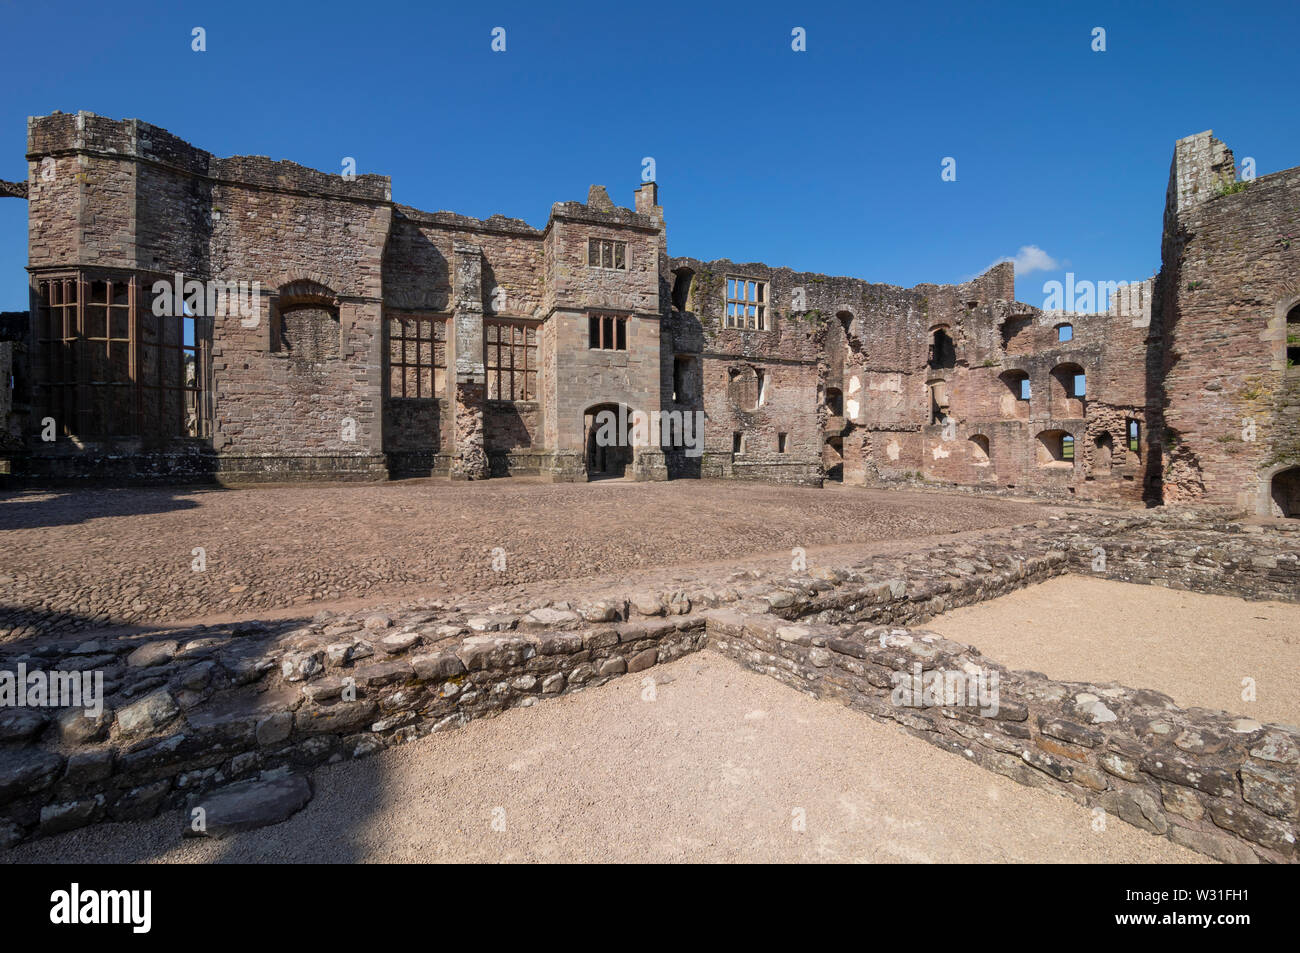 The Pitched Stone Court at Raglan castle, Monmouthshire, Wales, UK Stock Photo